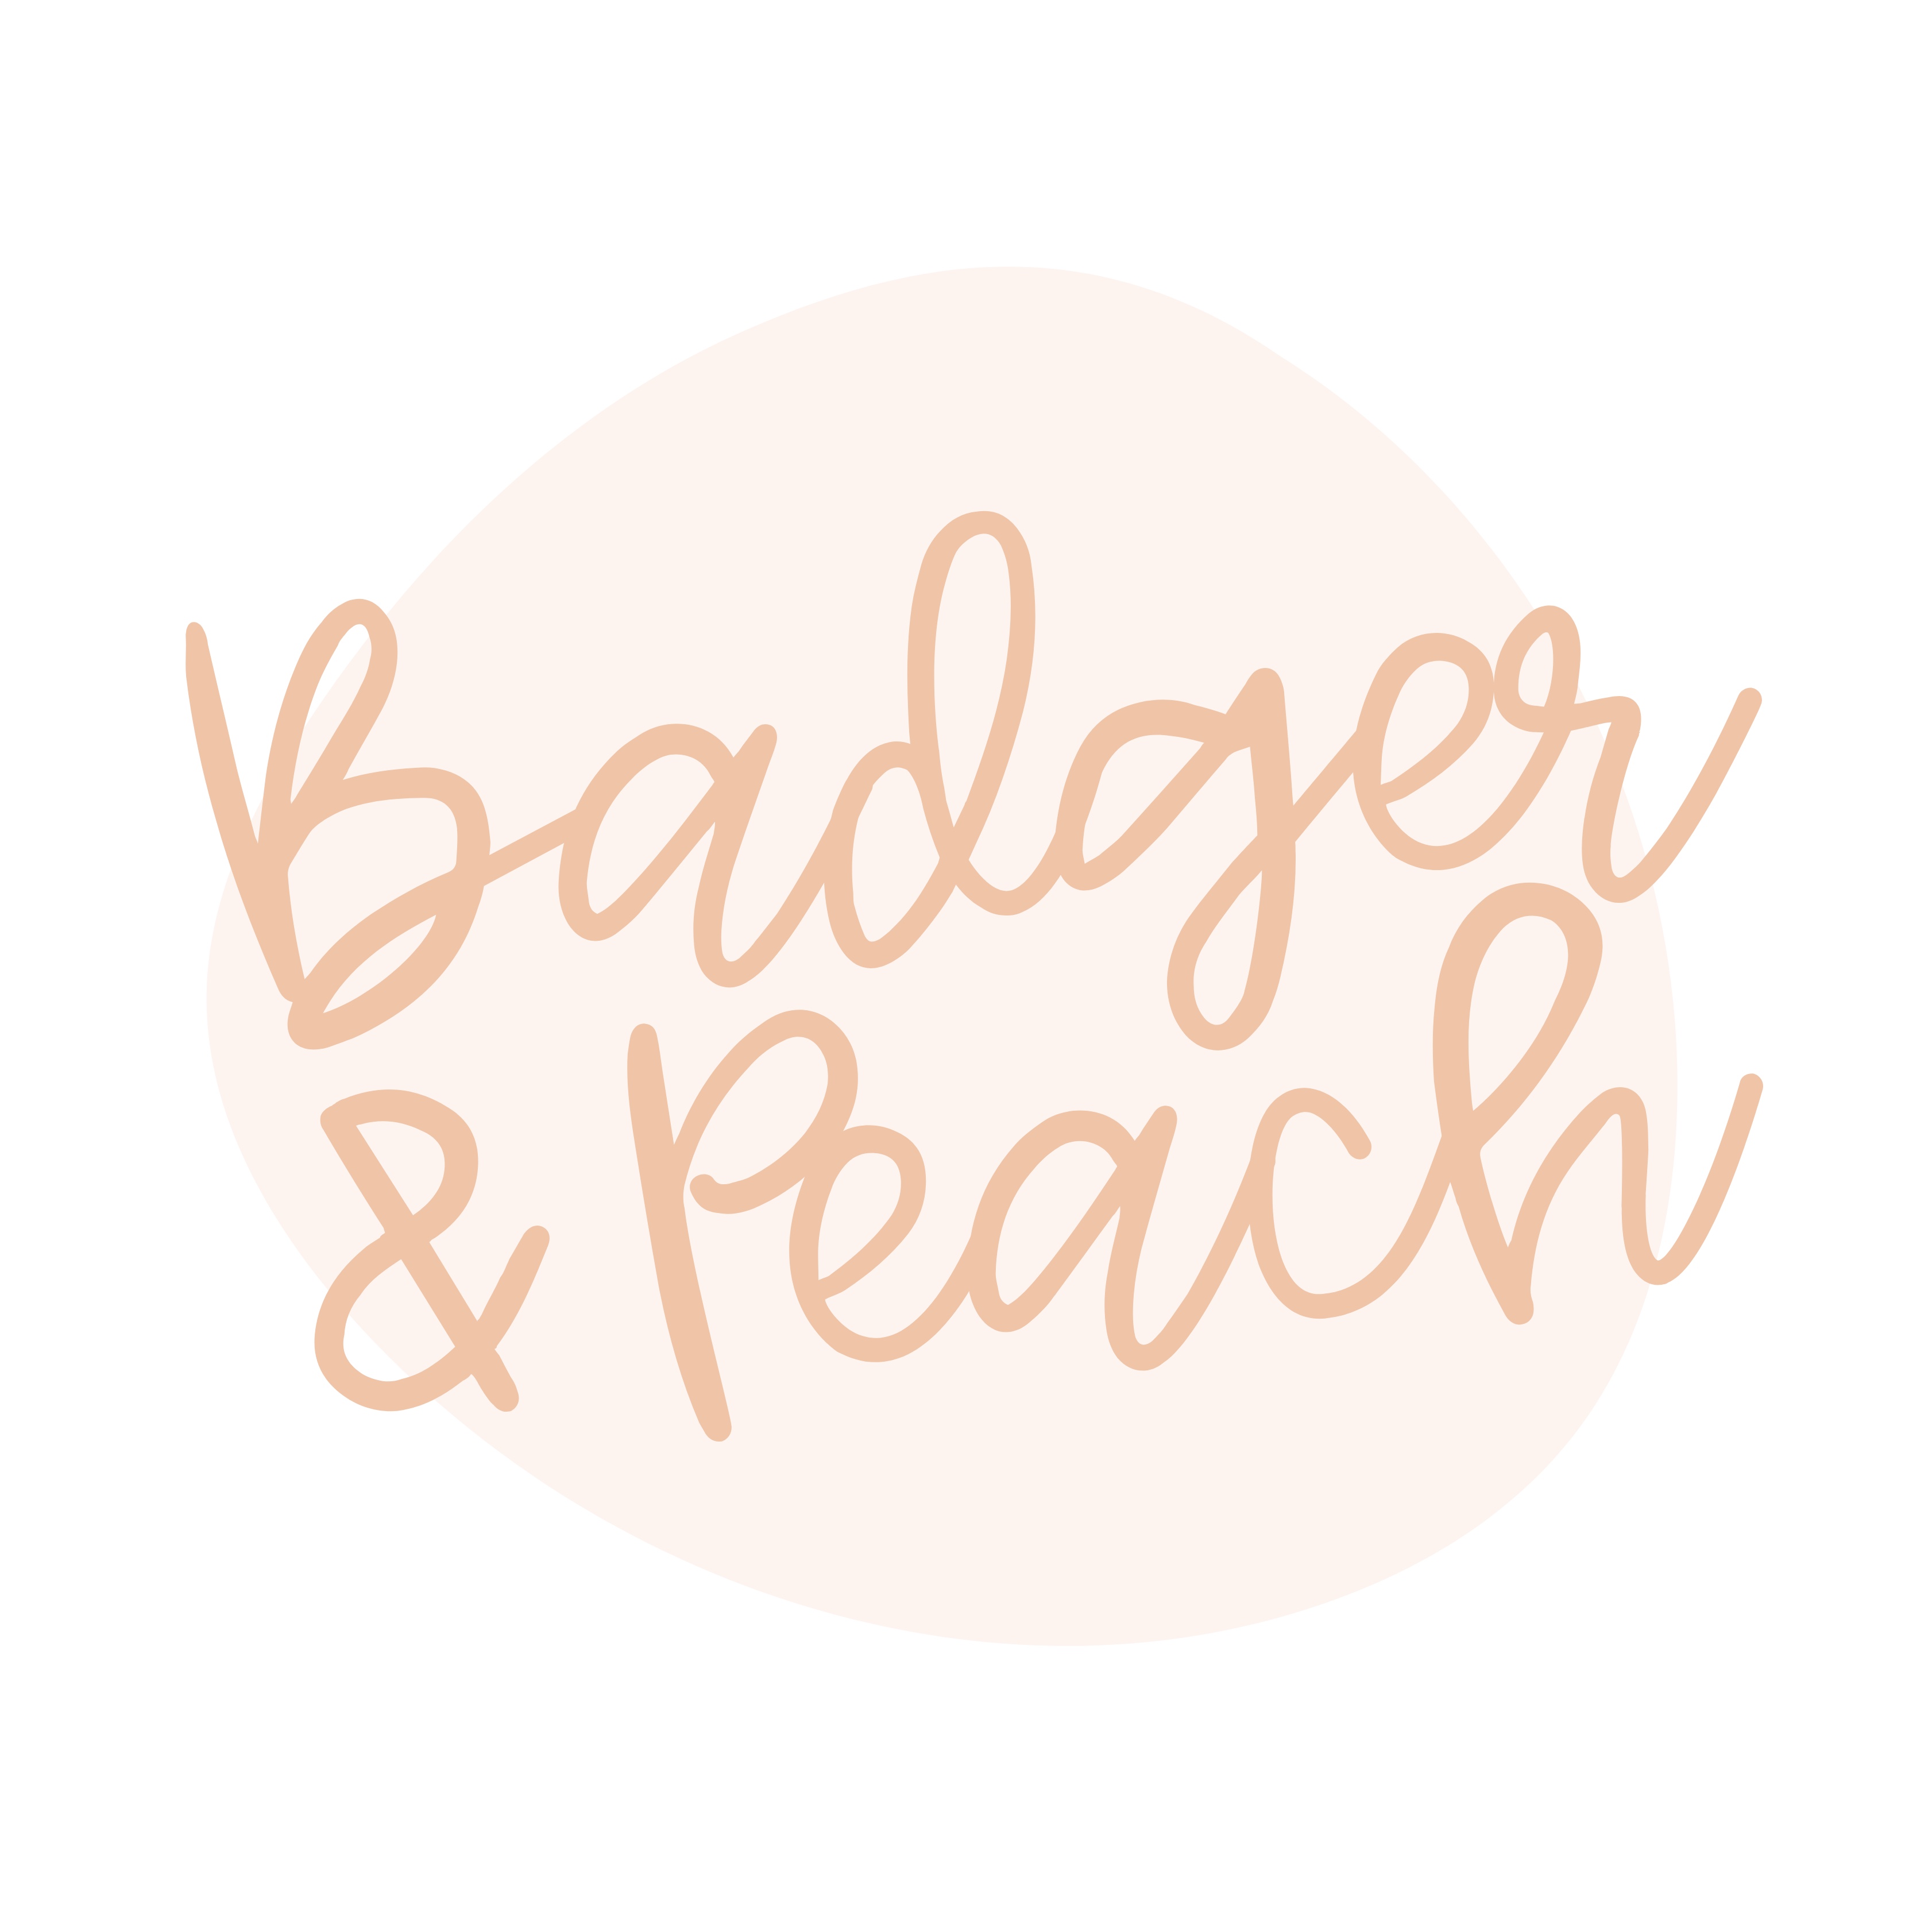 About - Badger & Peach